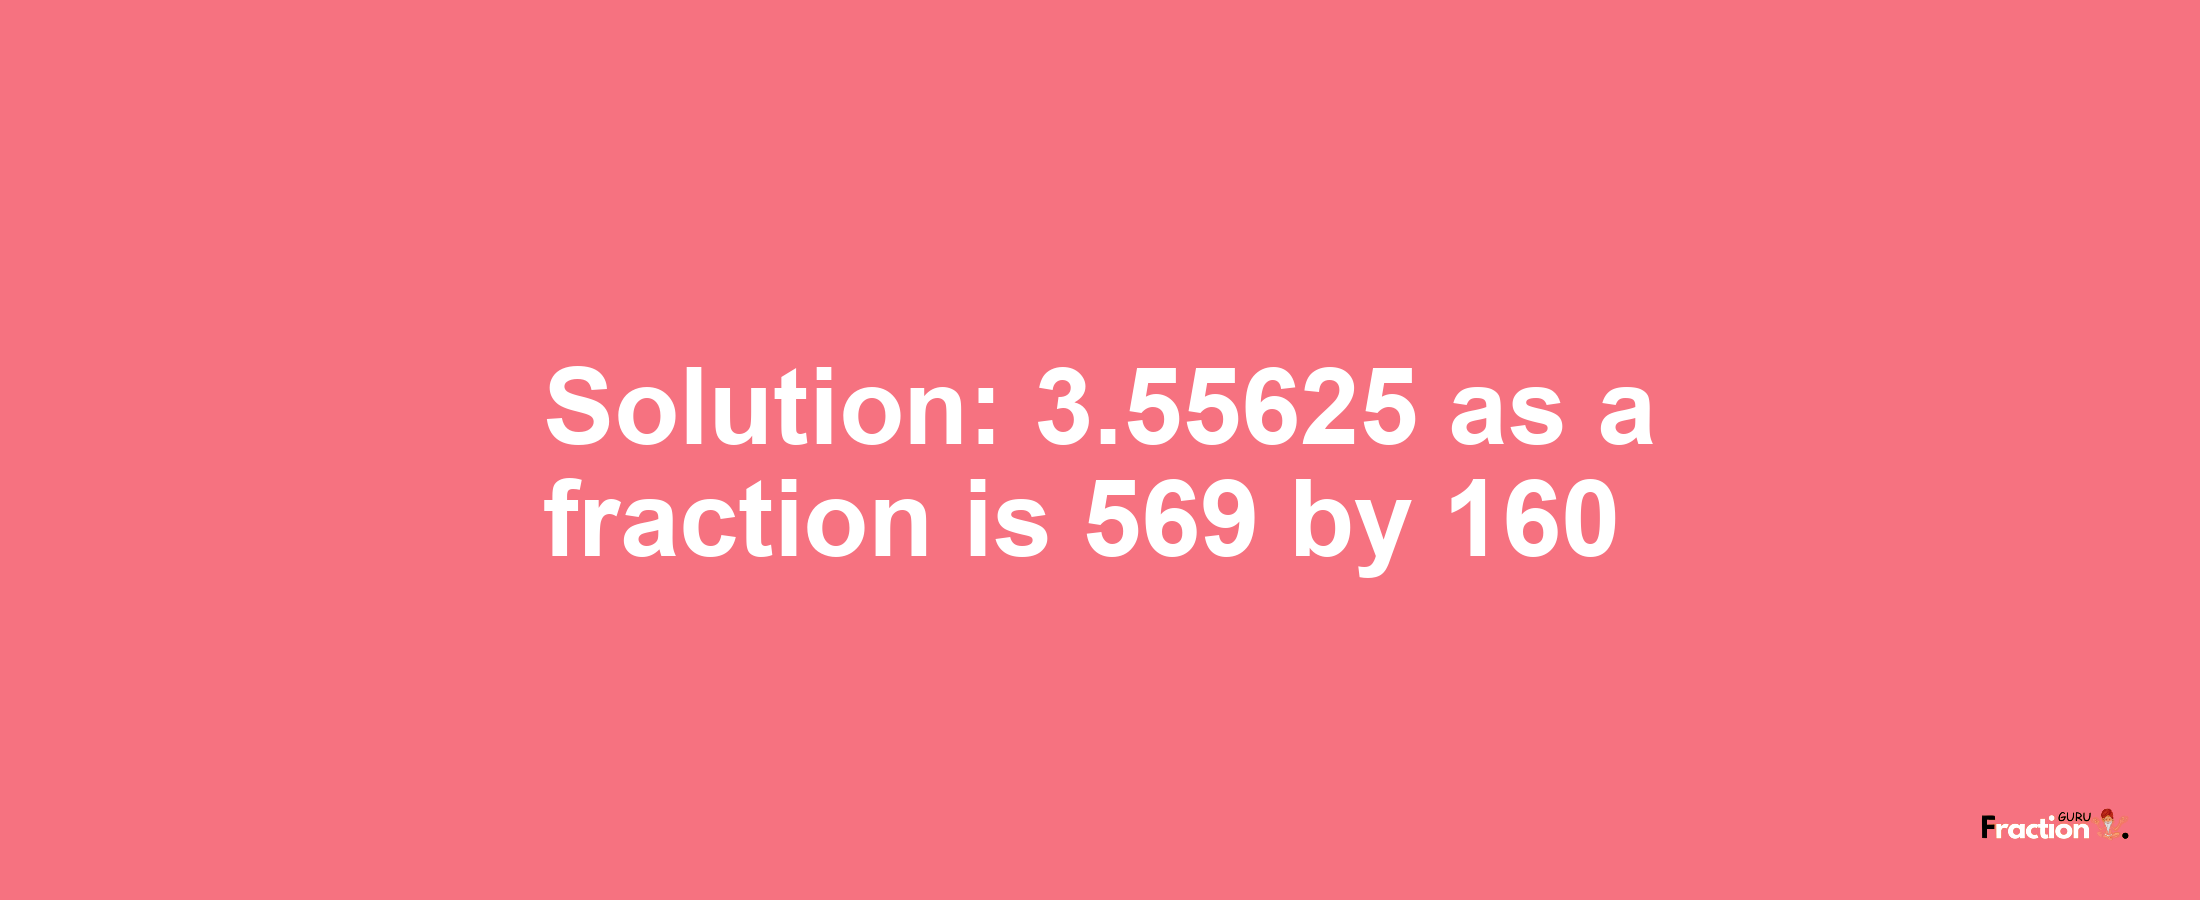 Solution:3.55625 as a fraction is 569/160